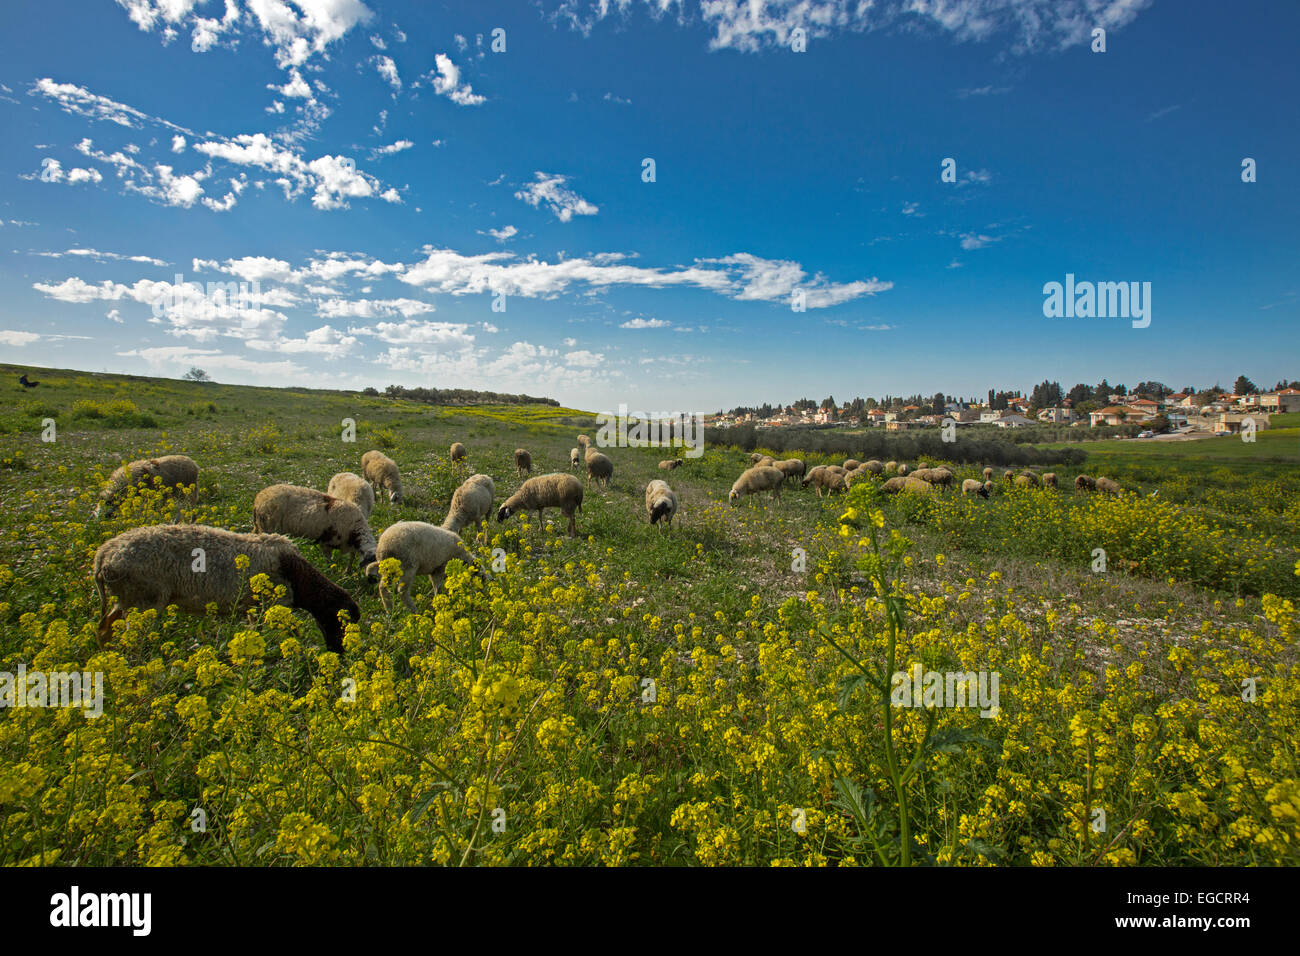 herd of sheep graze in a field of wildflowers Photographed in Israel Stock Photo